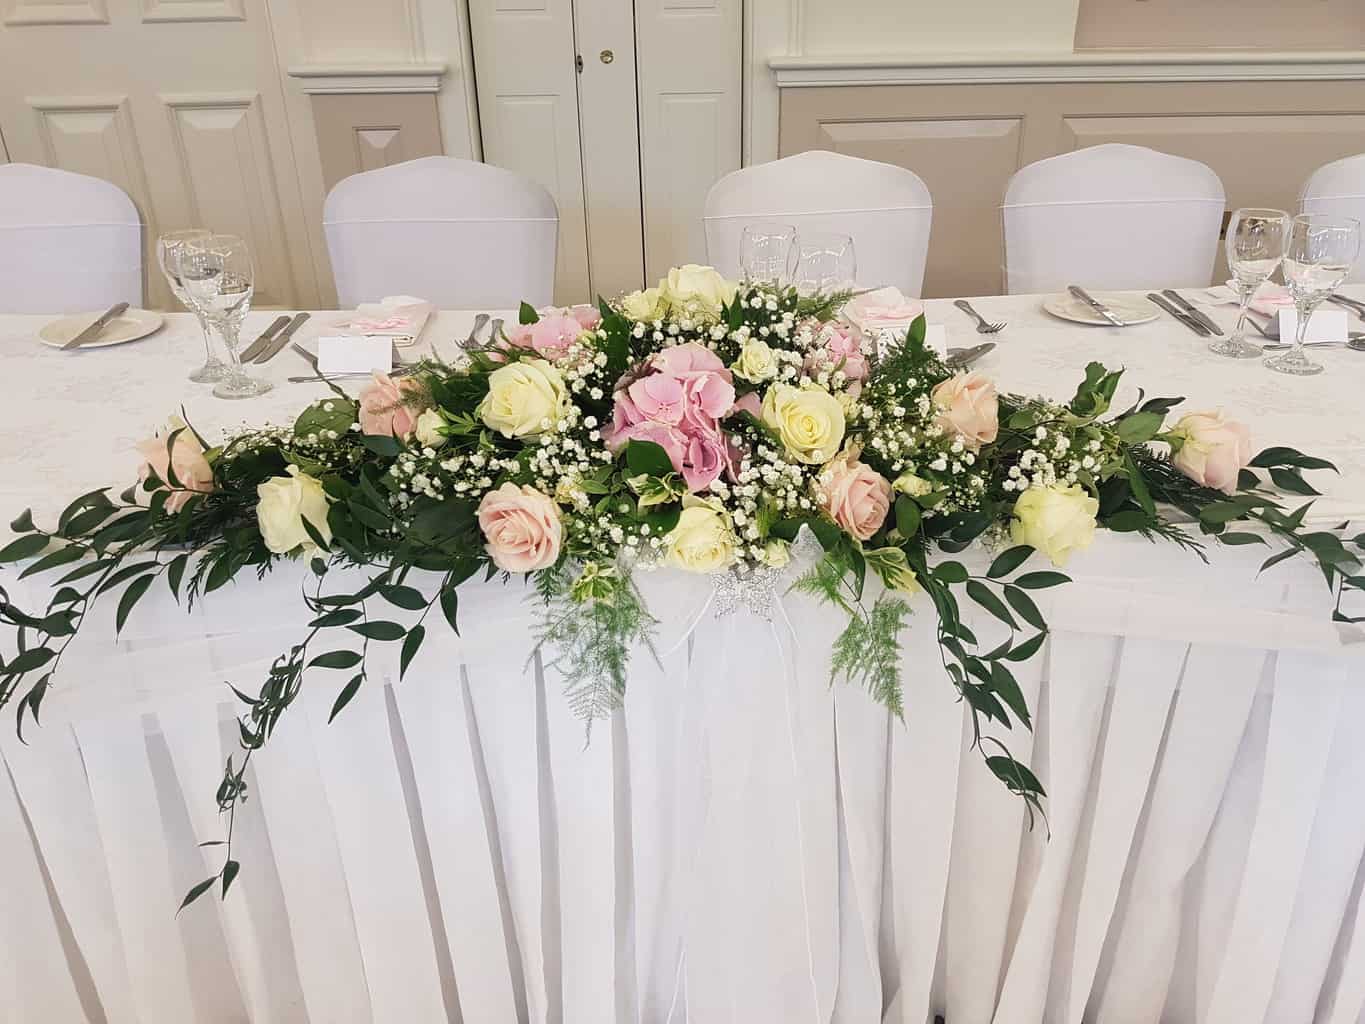 Top Table Arrangement Wedding Wild, What Is The Top Table Layout For A Wedding